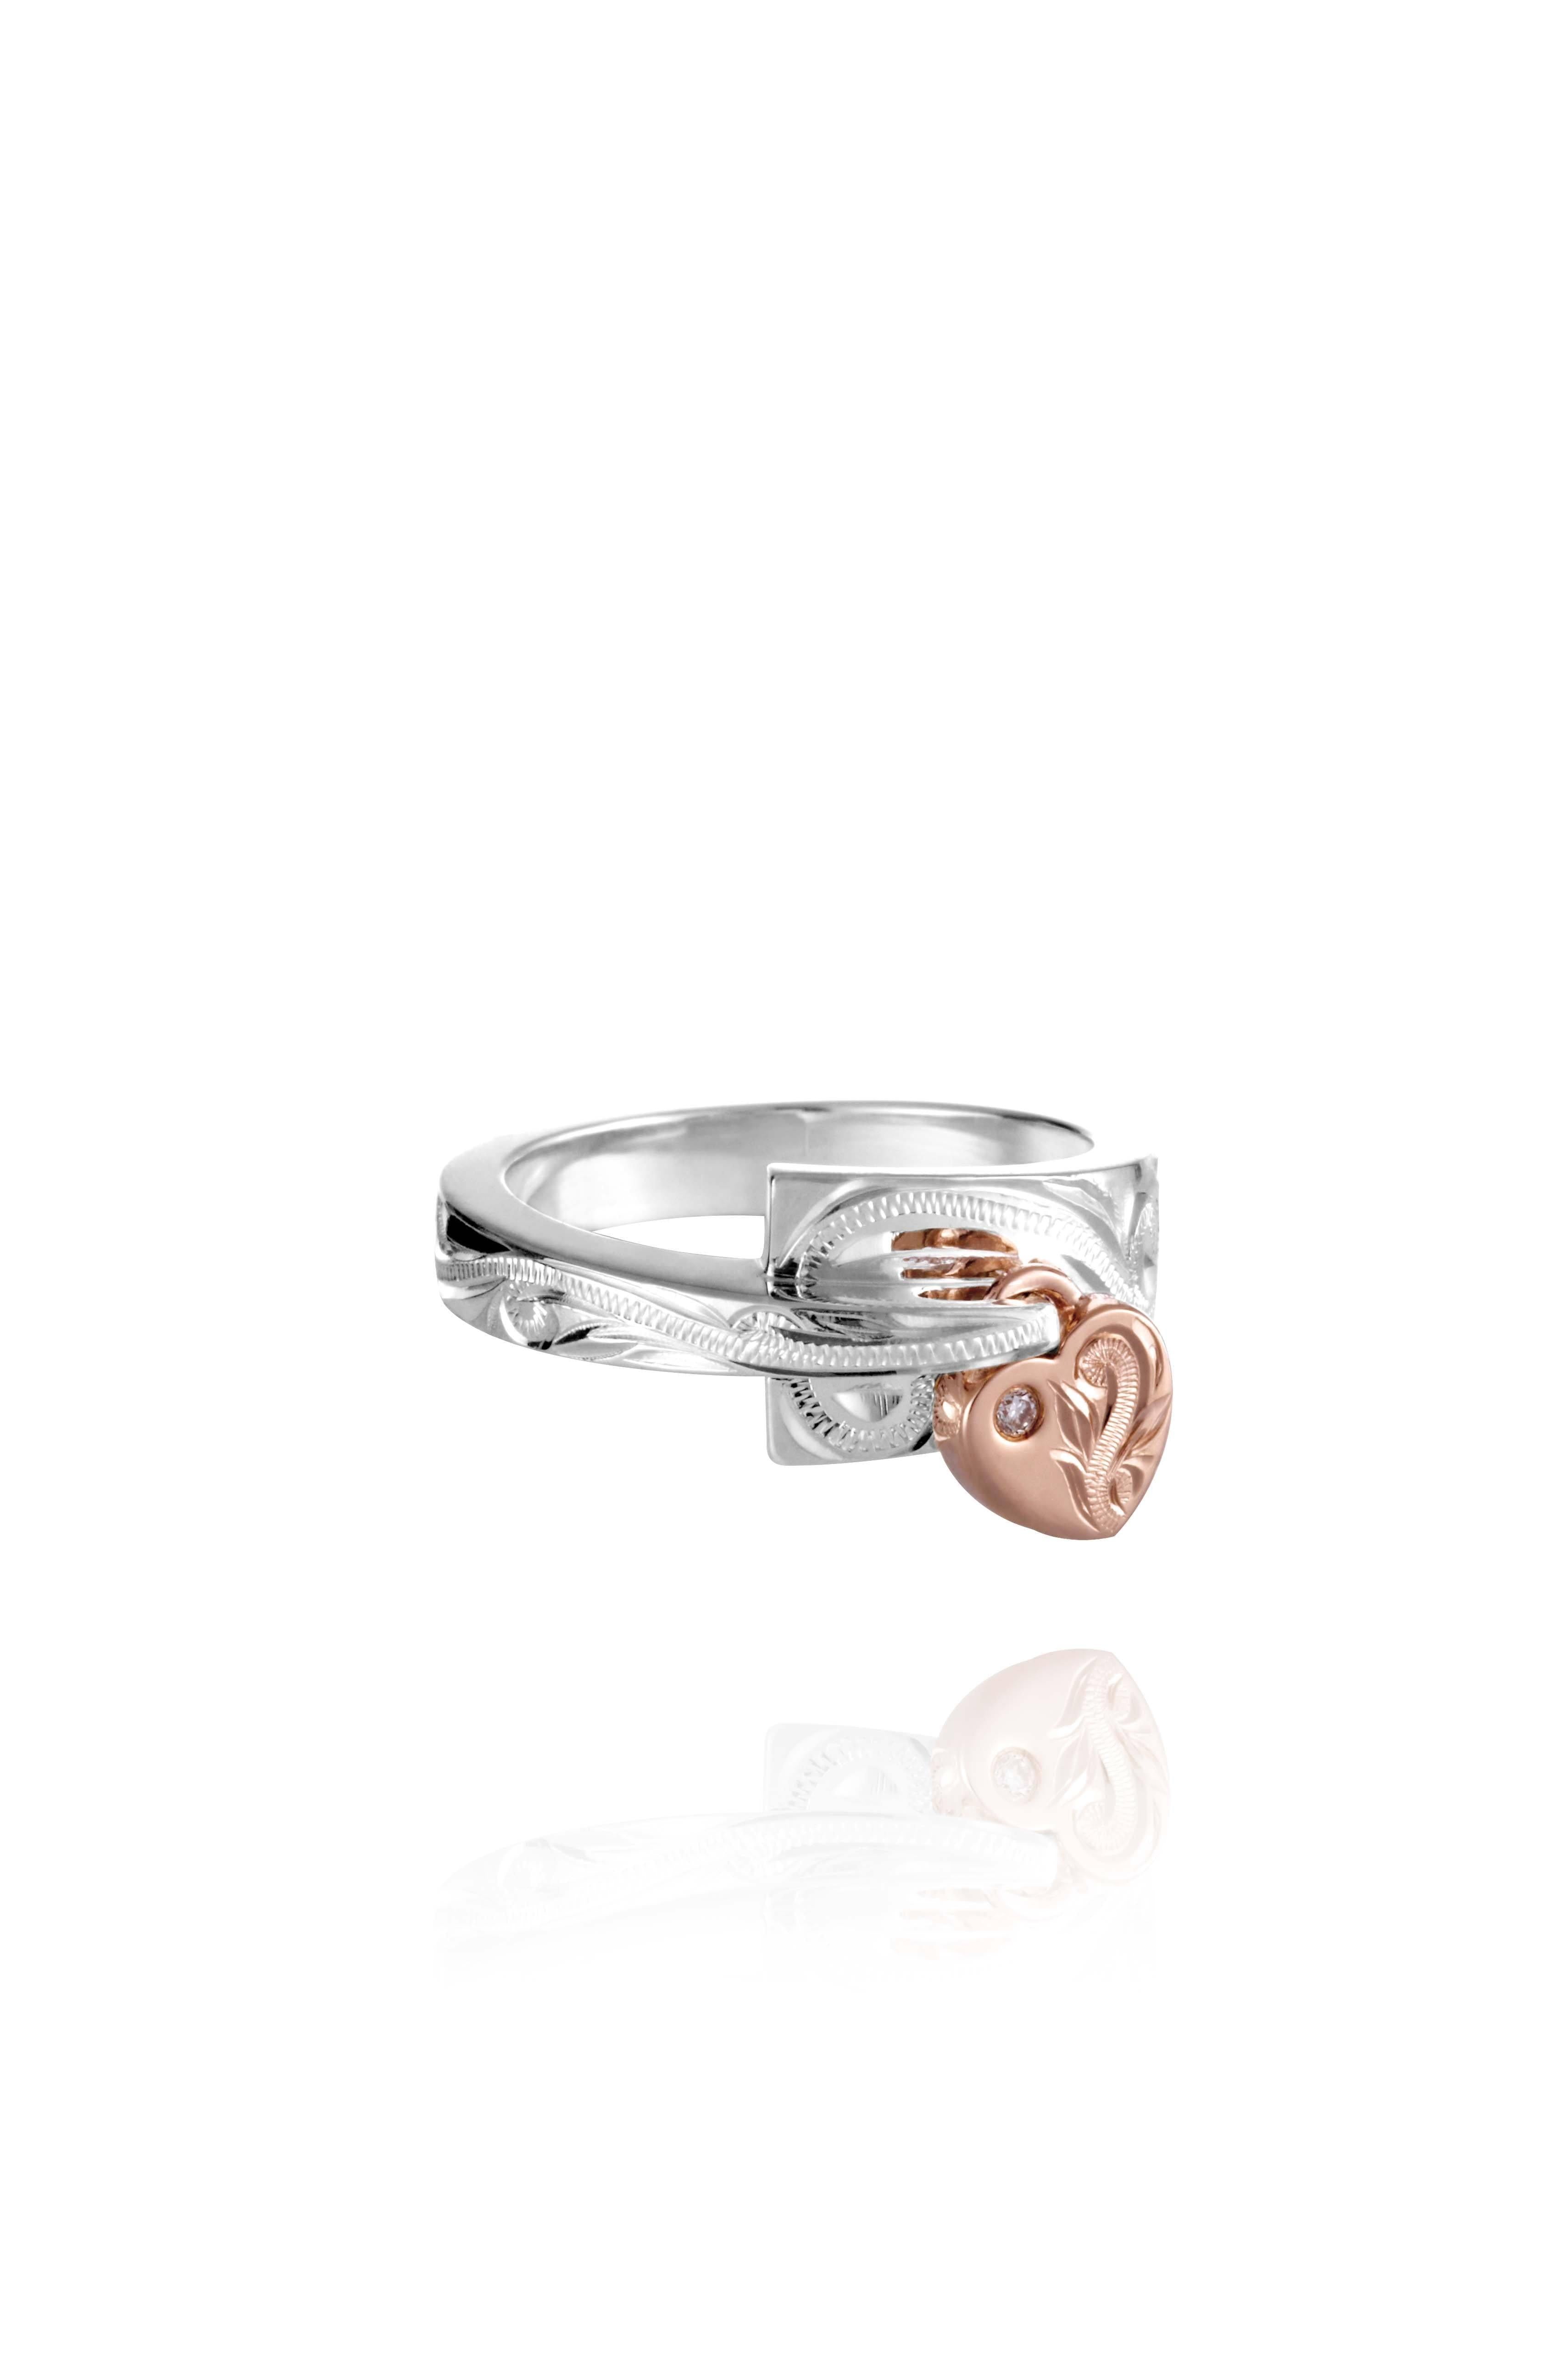 The picture shows a 14K rose gold and 925 sterling silver two-tone heart wrap ring with hand-engravings and a diamond.